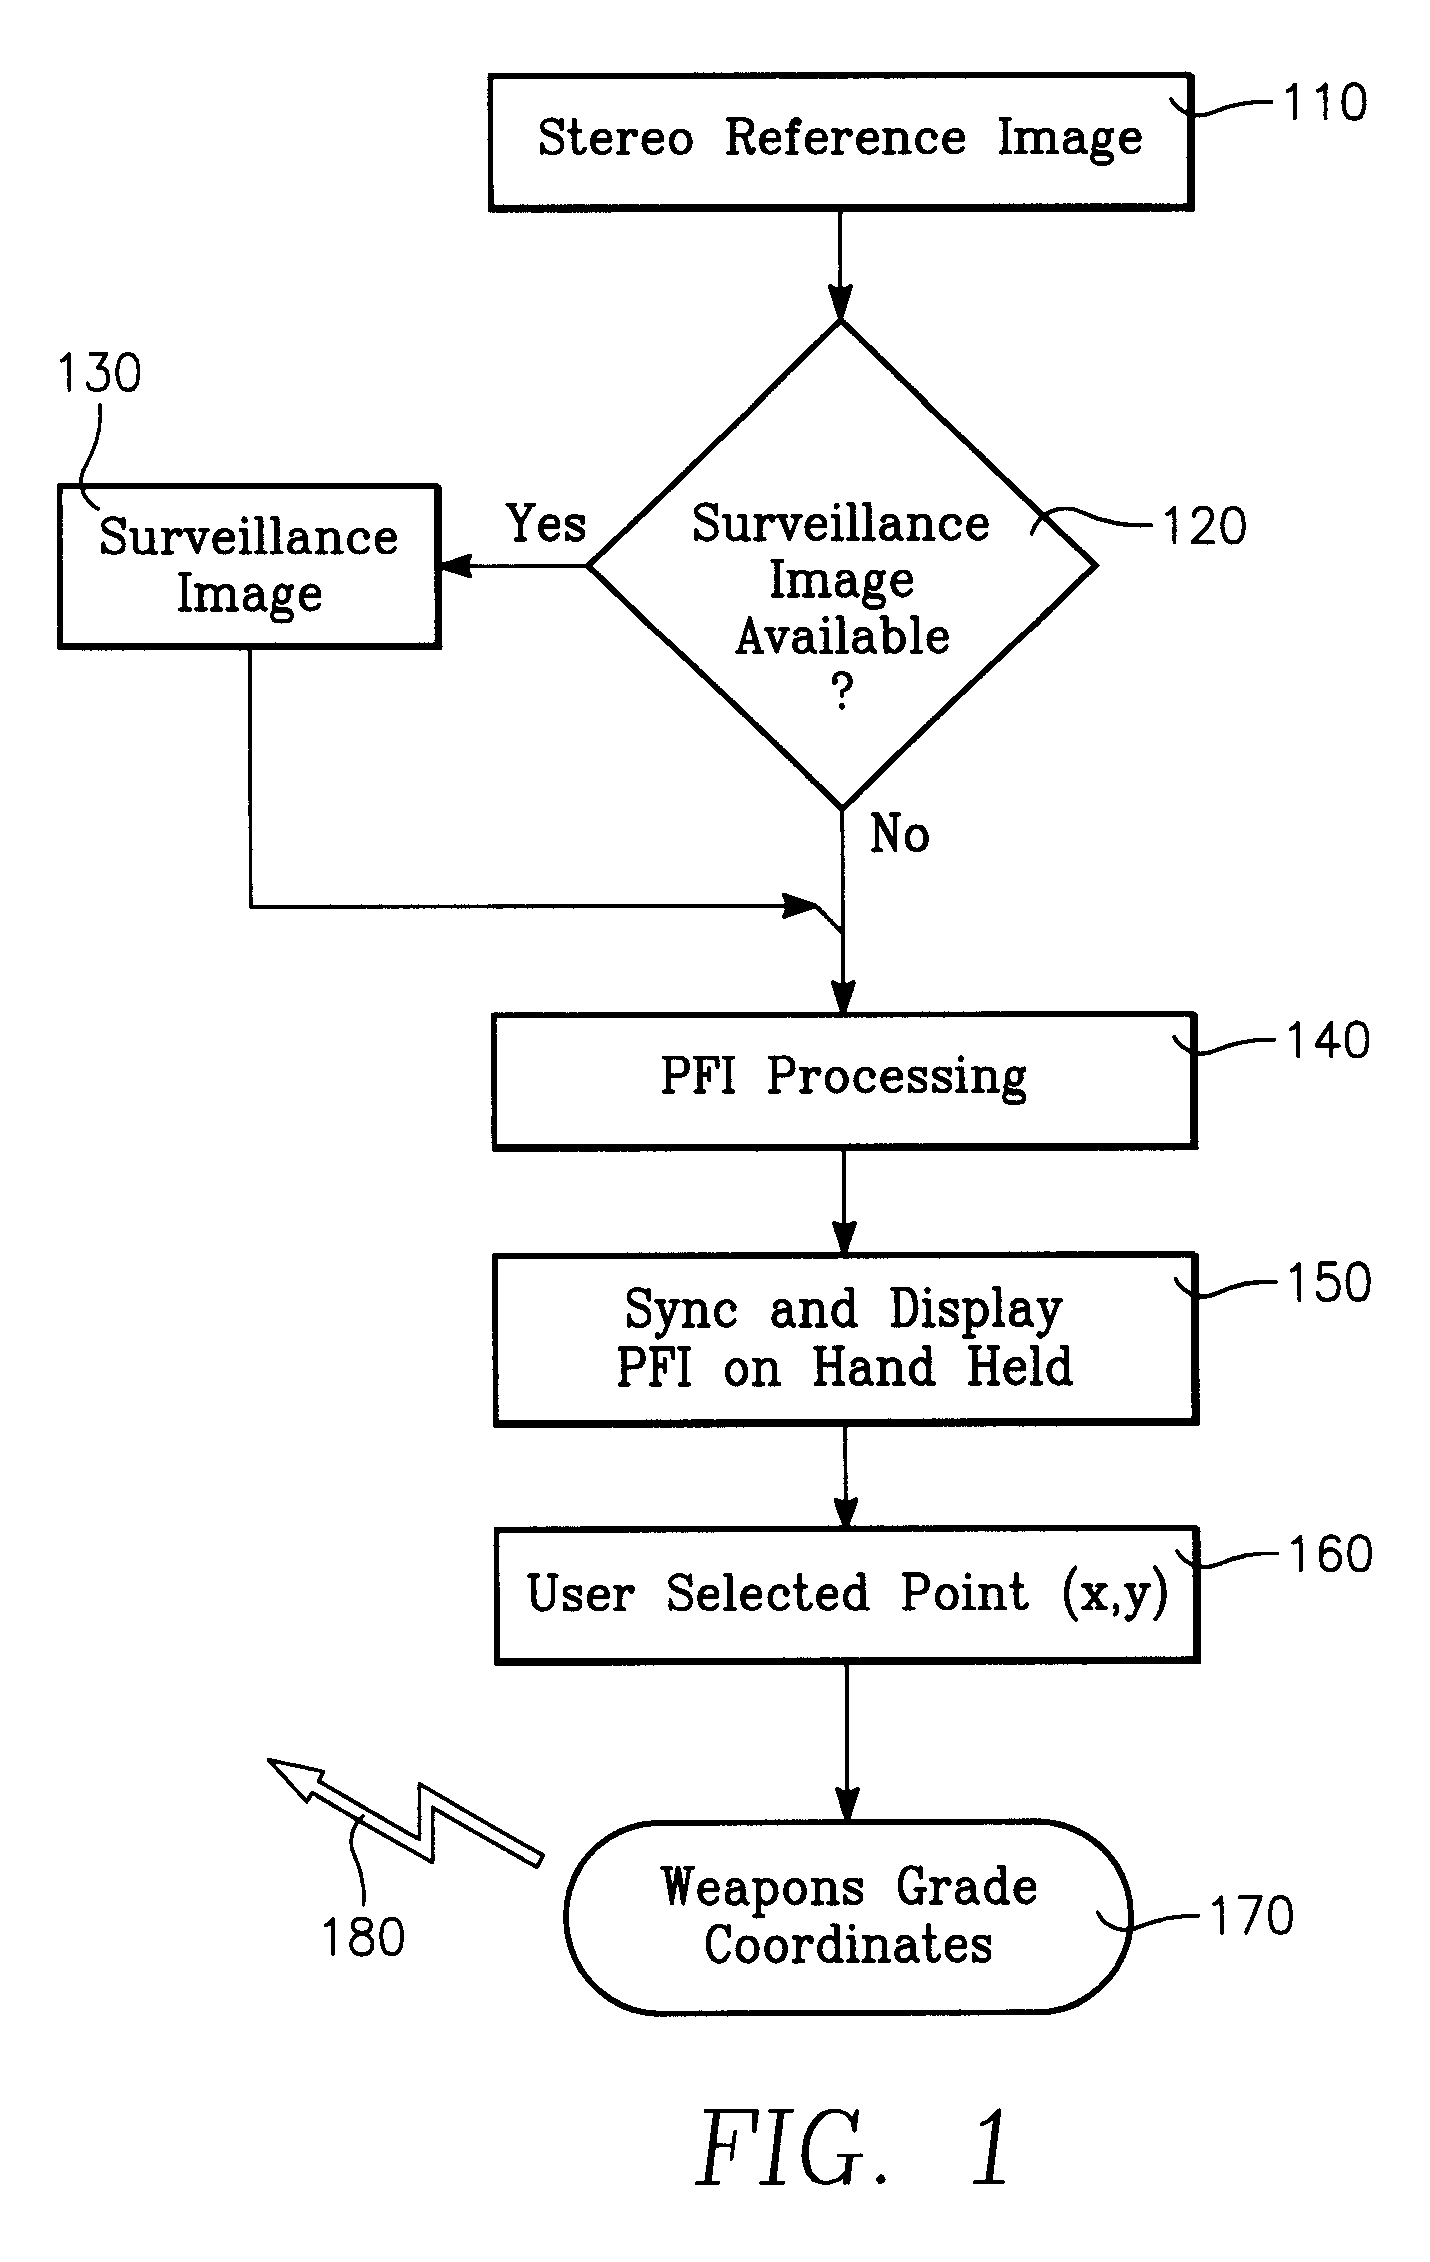 Method and apparatus for generating a precision fires image using a handheld device for image based coordinate determination